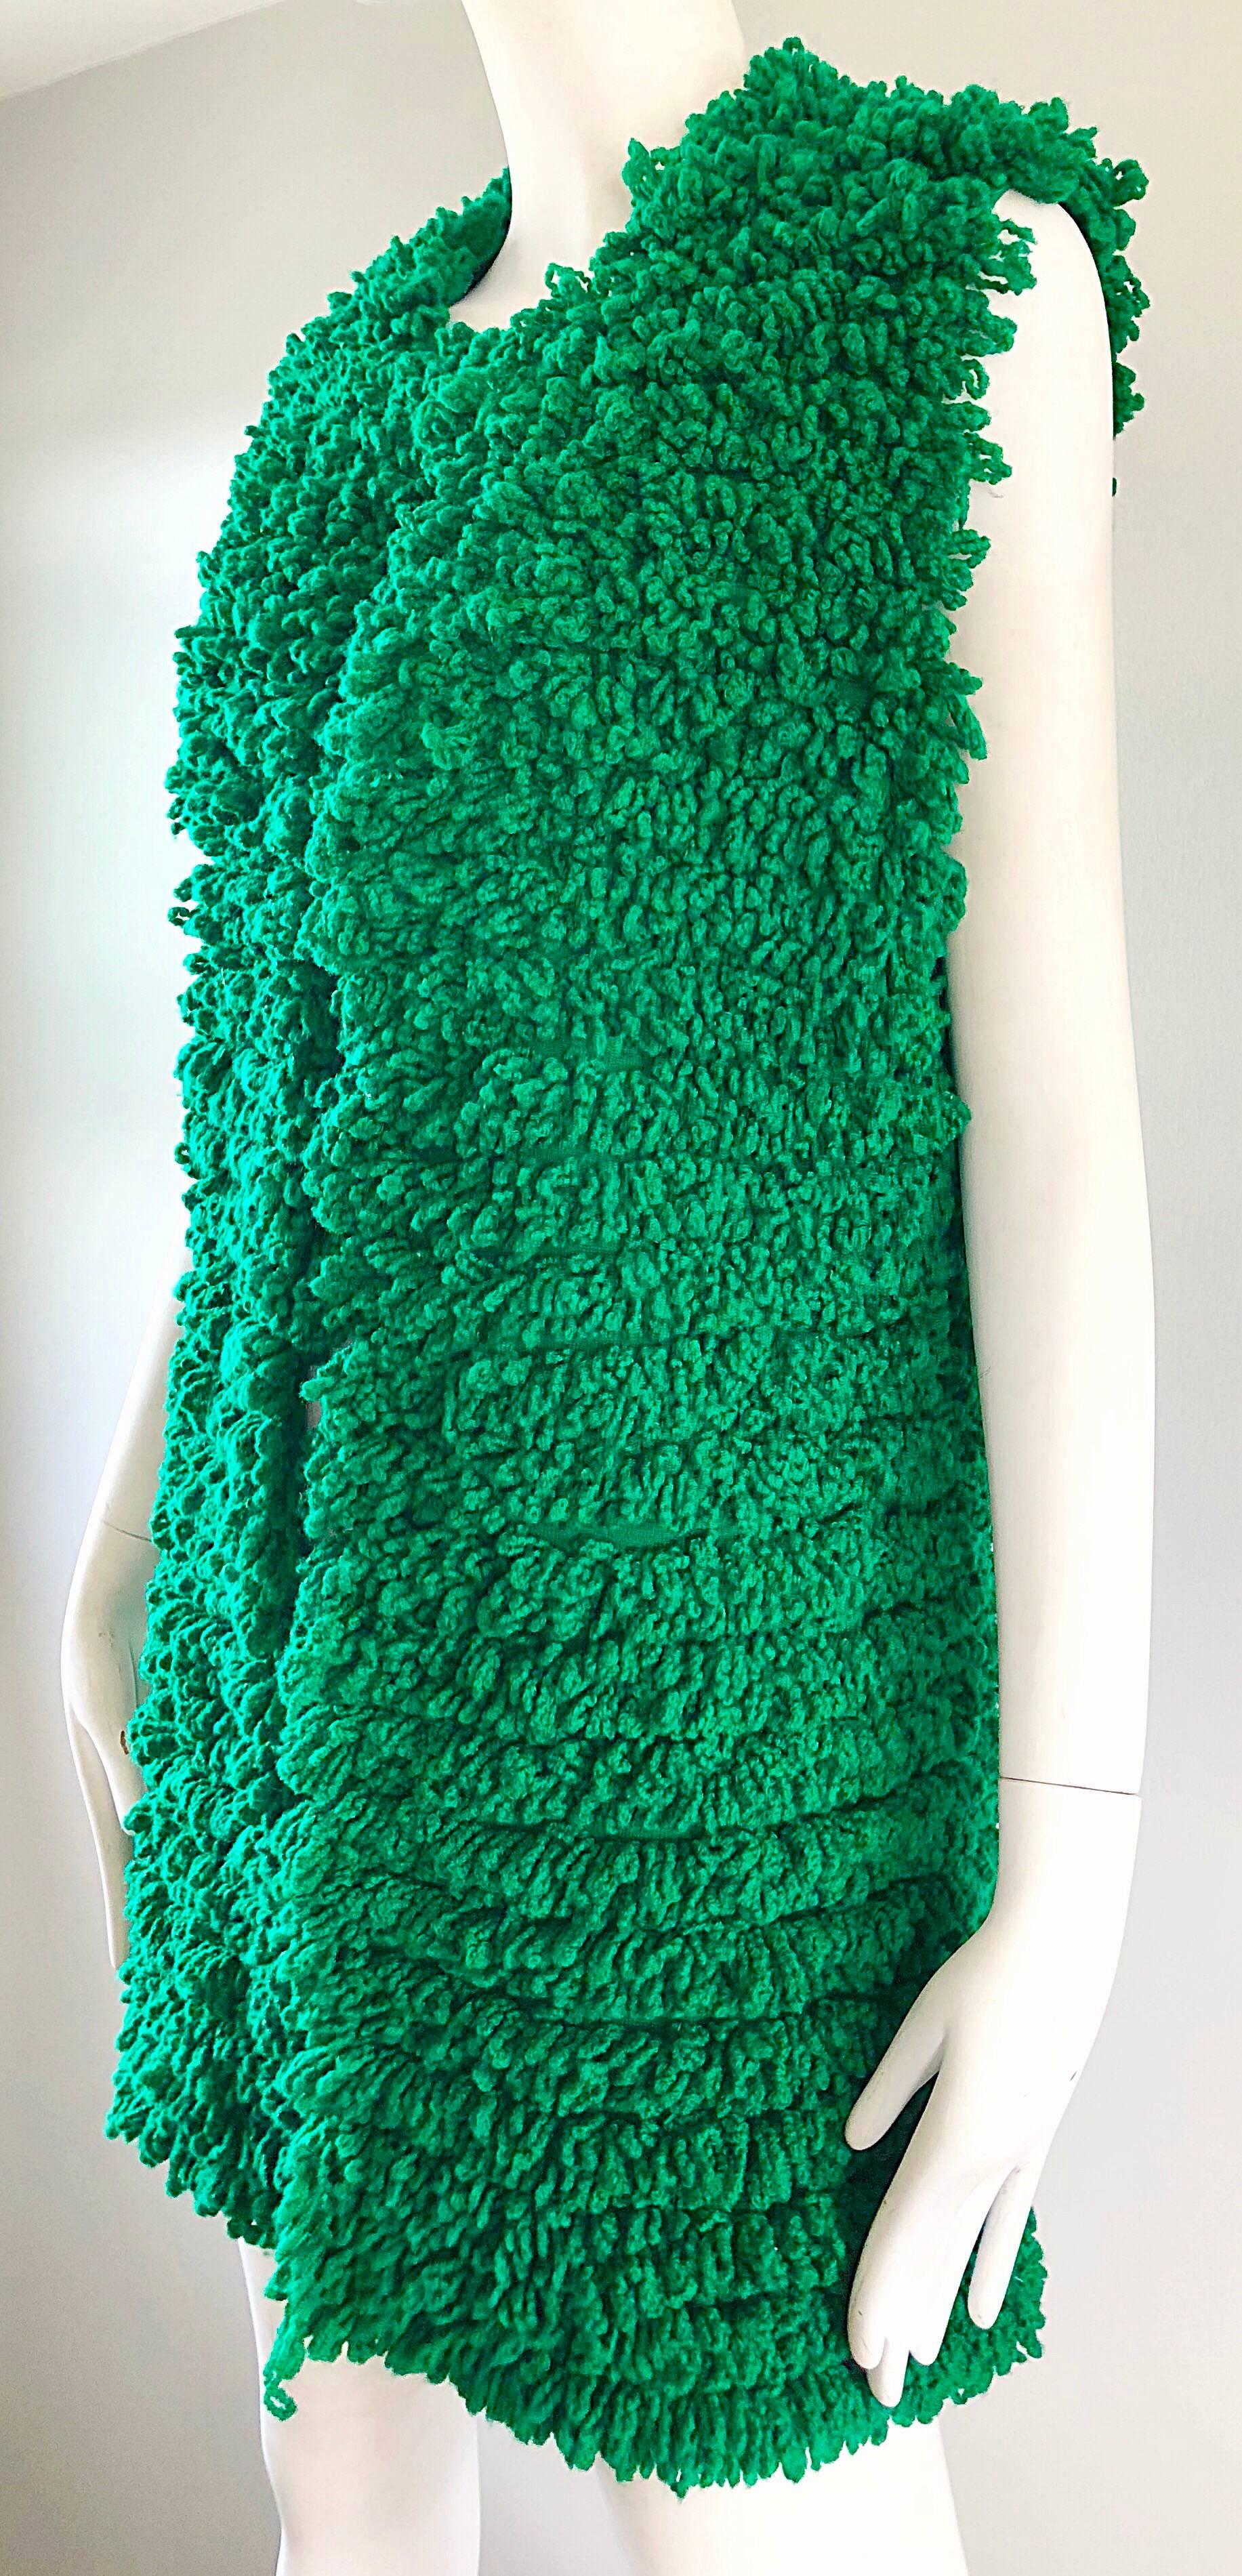 1970s Di Costa Kelly Emerald Green Shag Carpet Sleeveless Vintage 70s Wool Vest In Excellent Condition For Sale In San Diego, CA